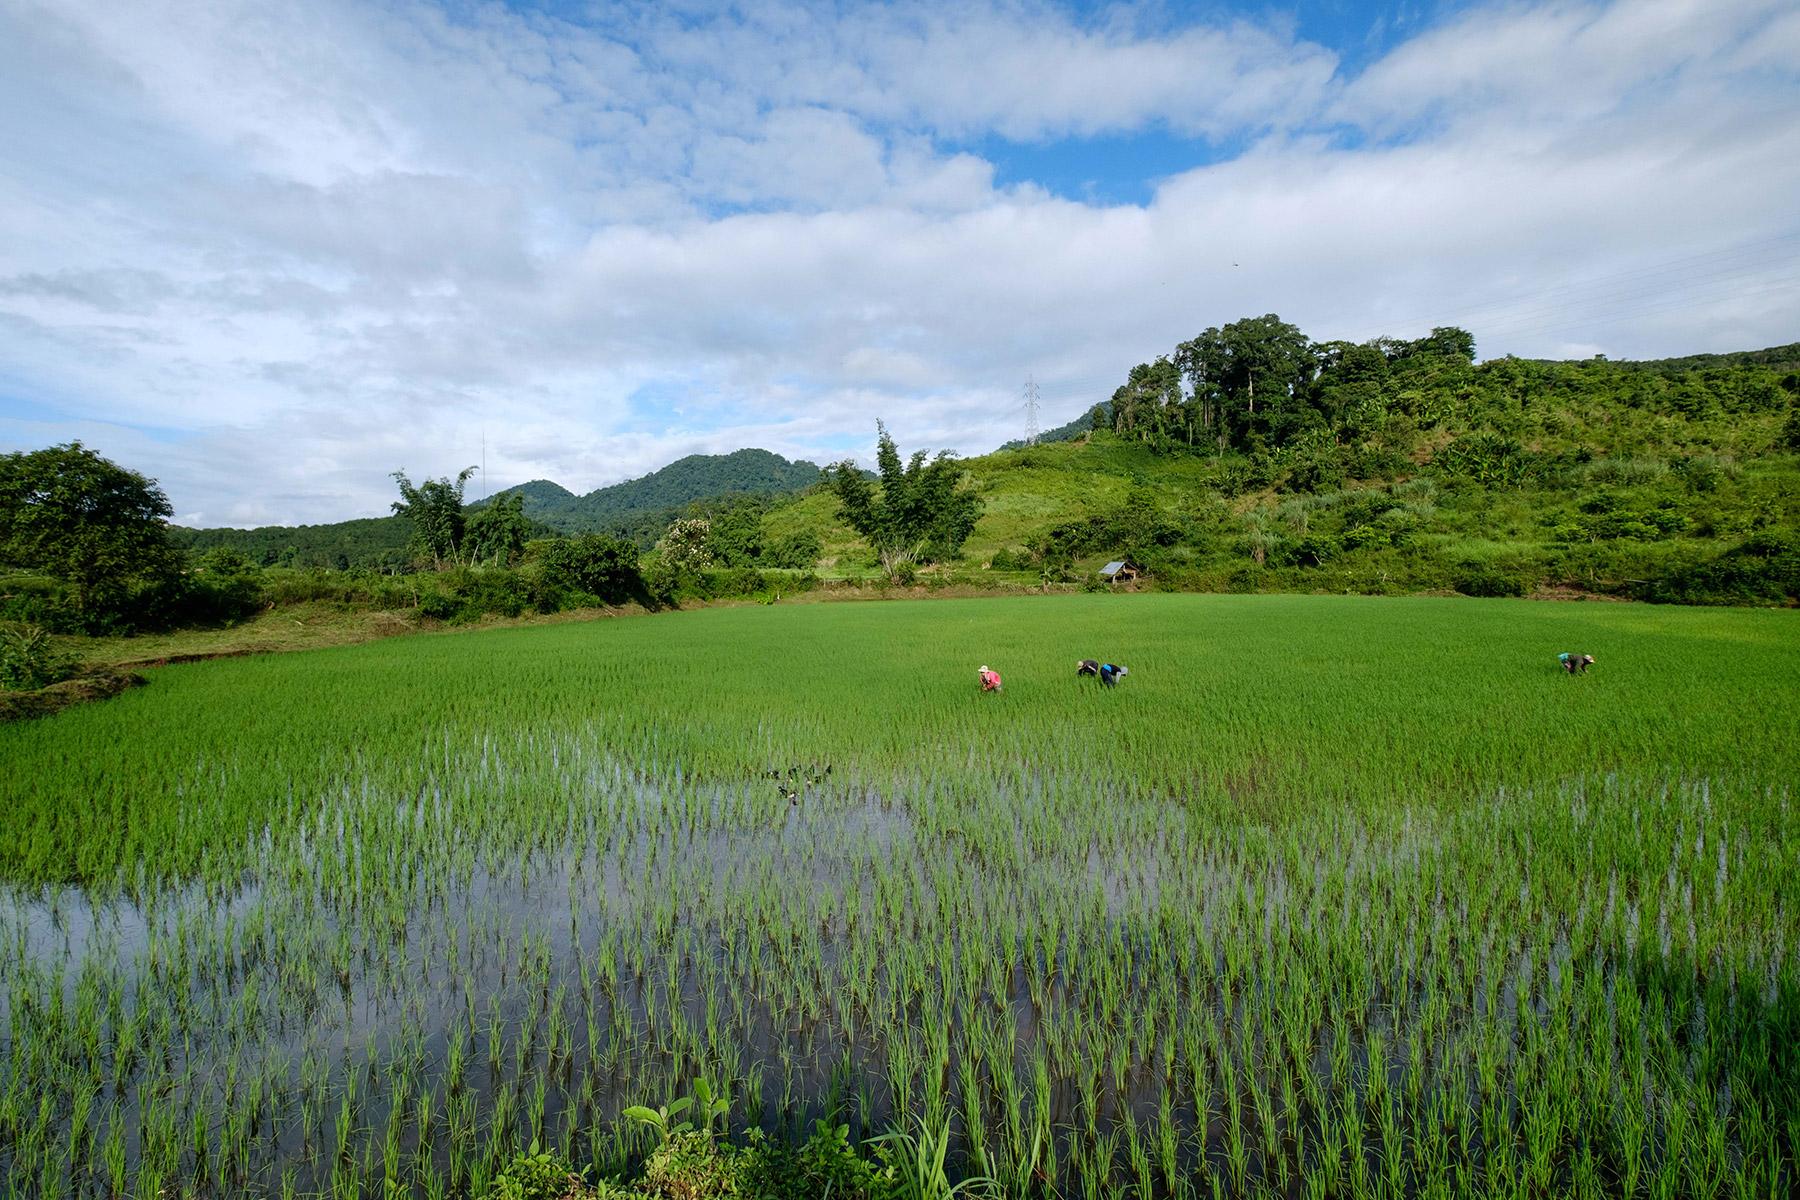 Farmers remove weeds in a Laos rice field. In most Asian countries, rice is both a main staple and a principal livelihood. Photo: Thomas Lohnes